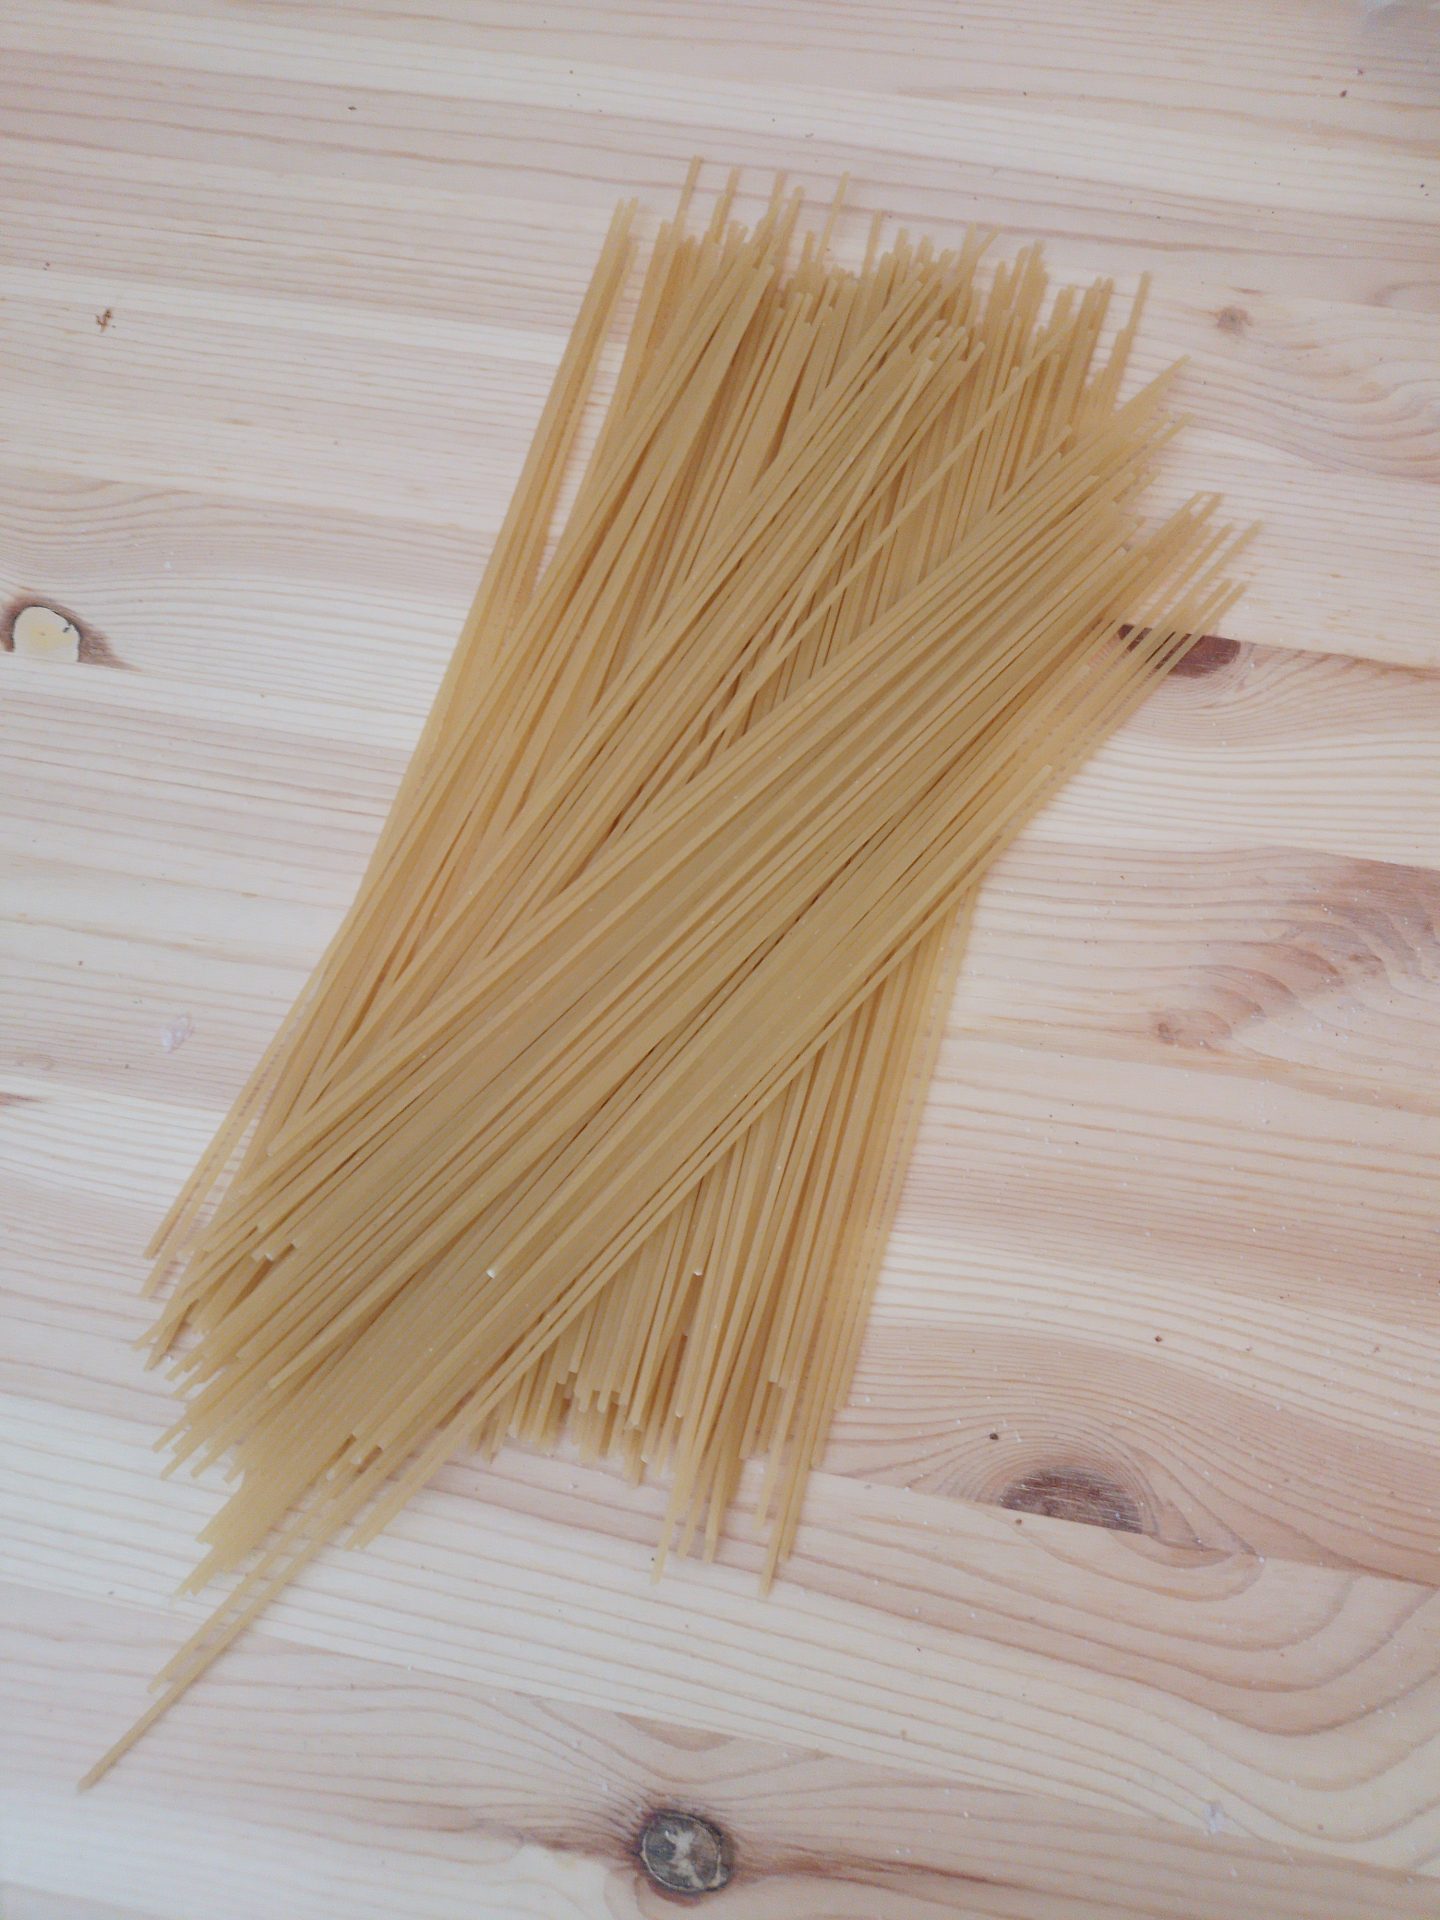 Learn How to Make Delicious Pasta in Minutes with this Simple Recipe!